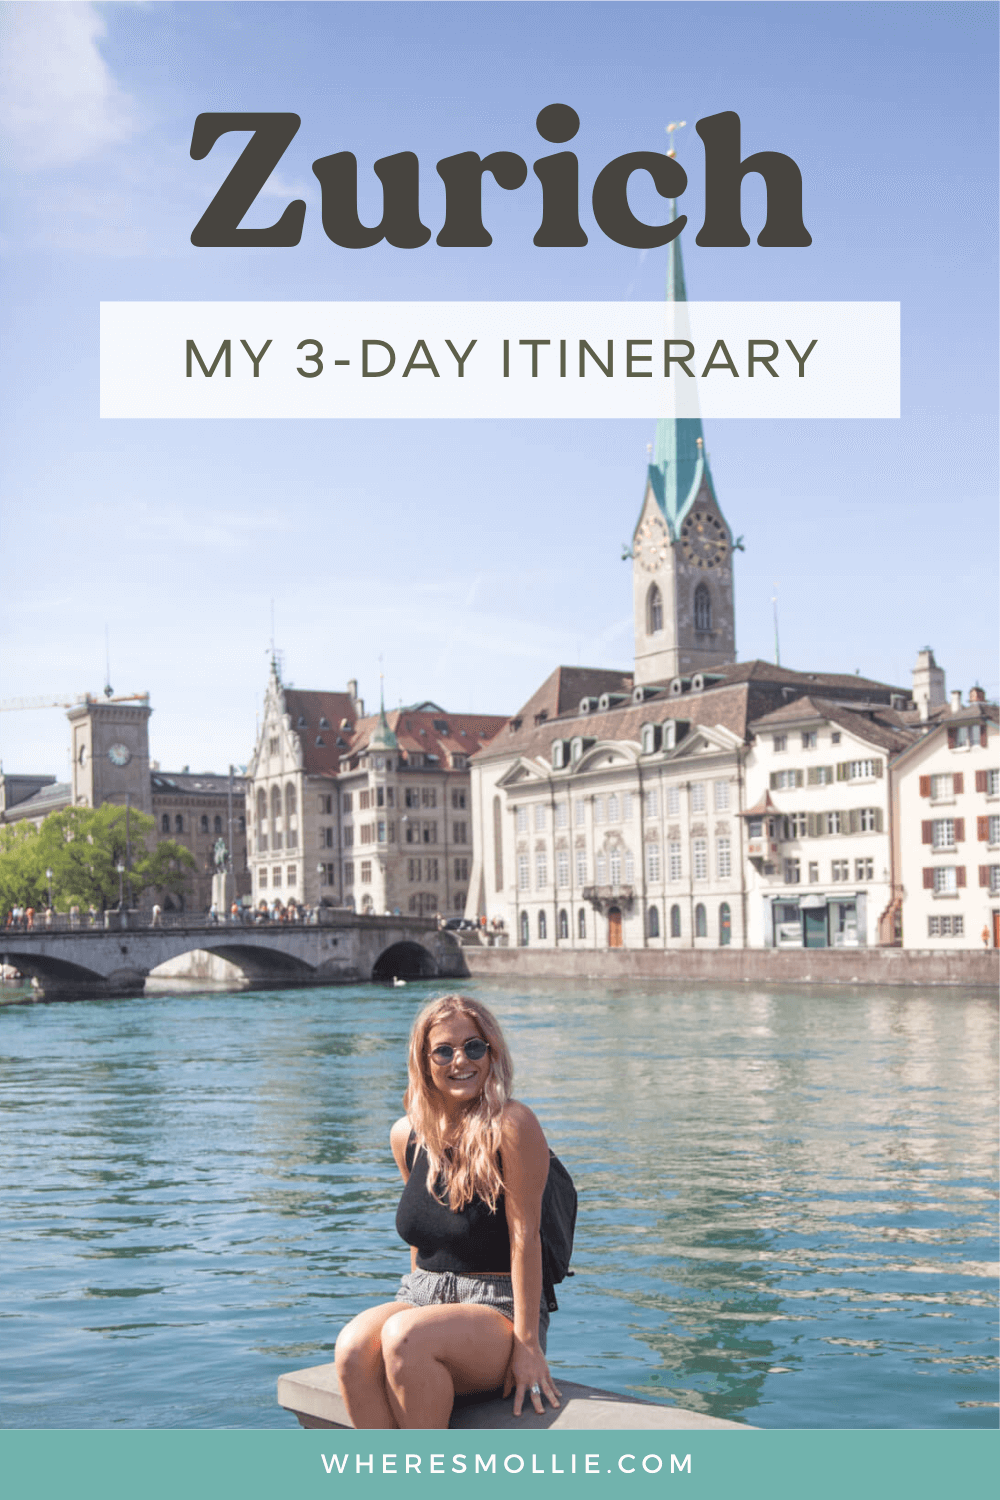 How to spend 3 days in Zurich during the summer